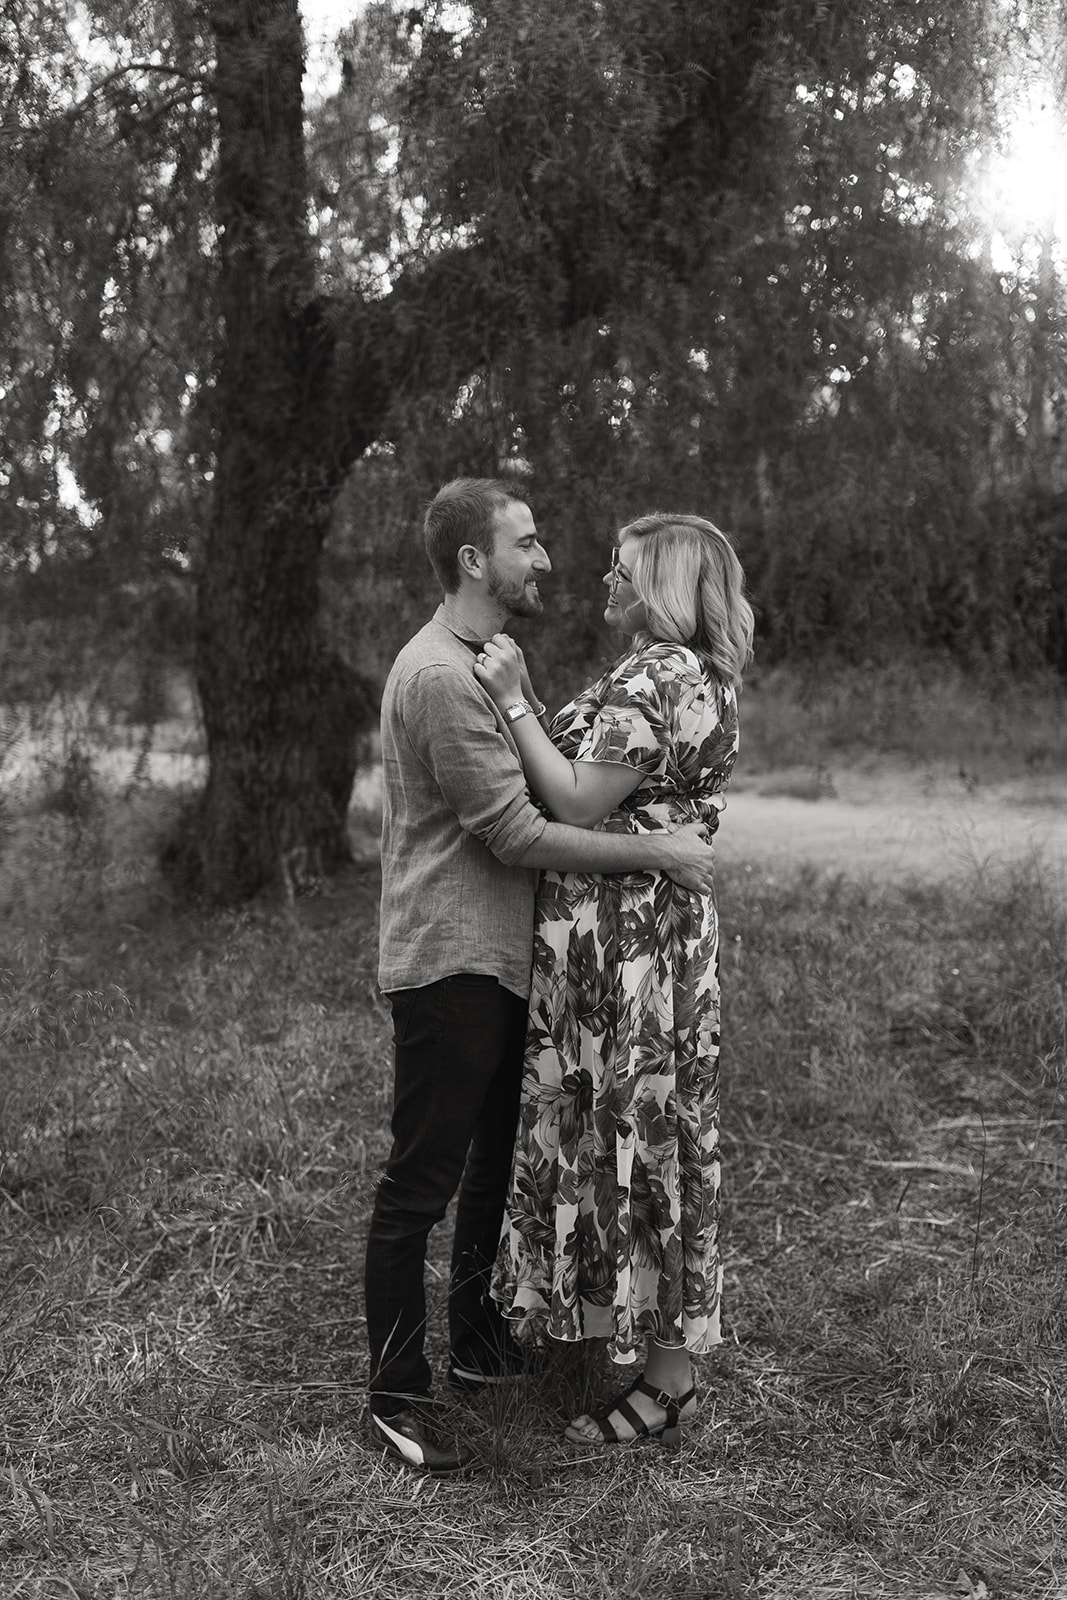 hiltscher park fullerton california engagement session northern california photographer orange county photography